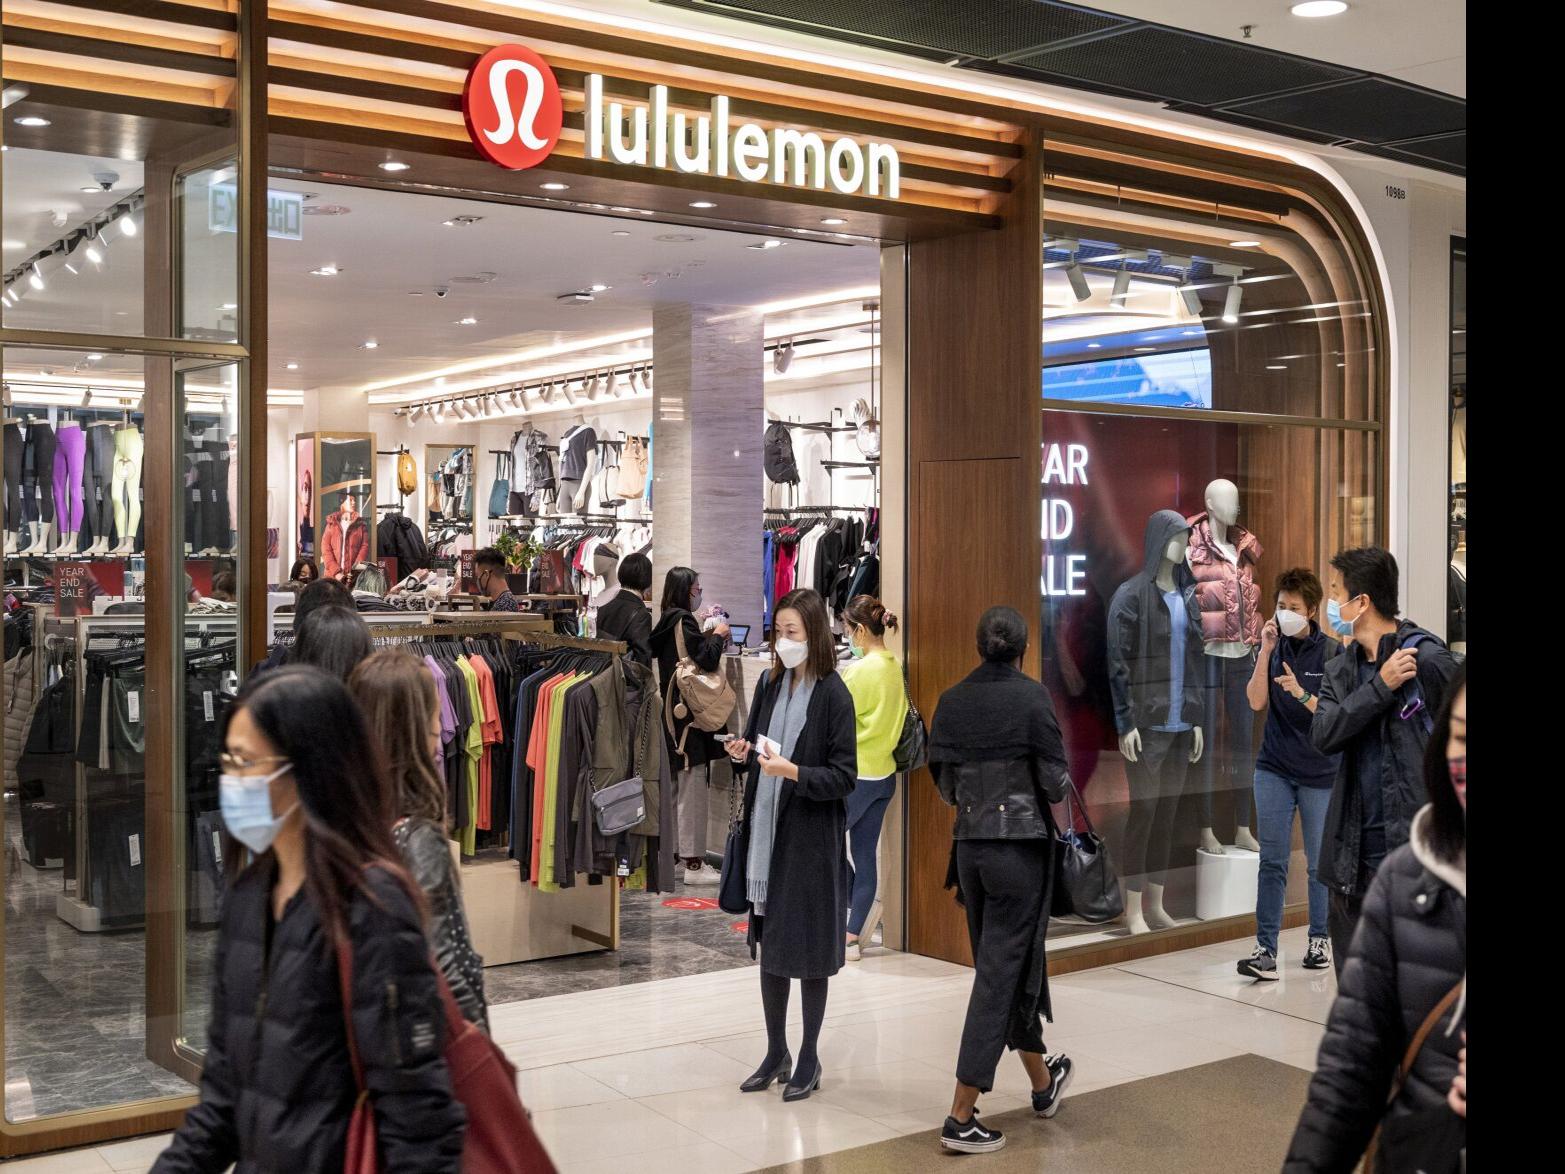 Lululemon Opens Significantly Expanded Store at West Edmonton Mall